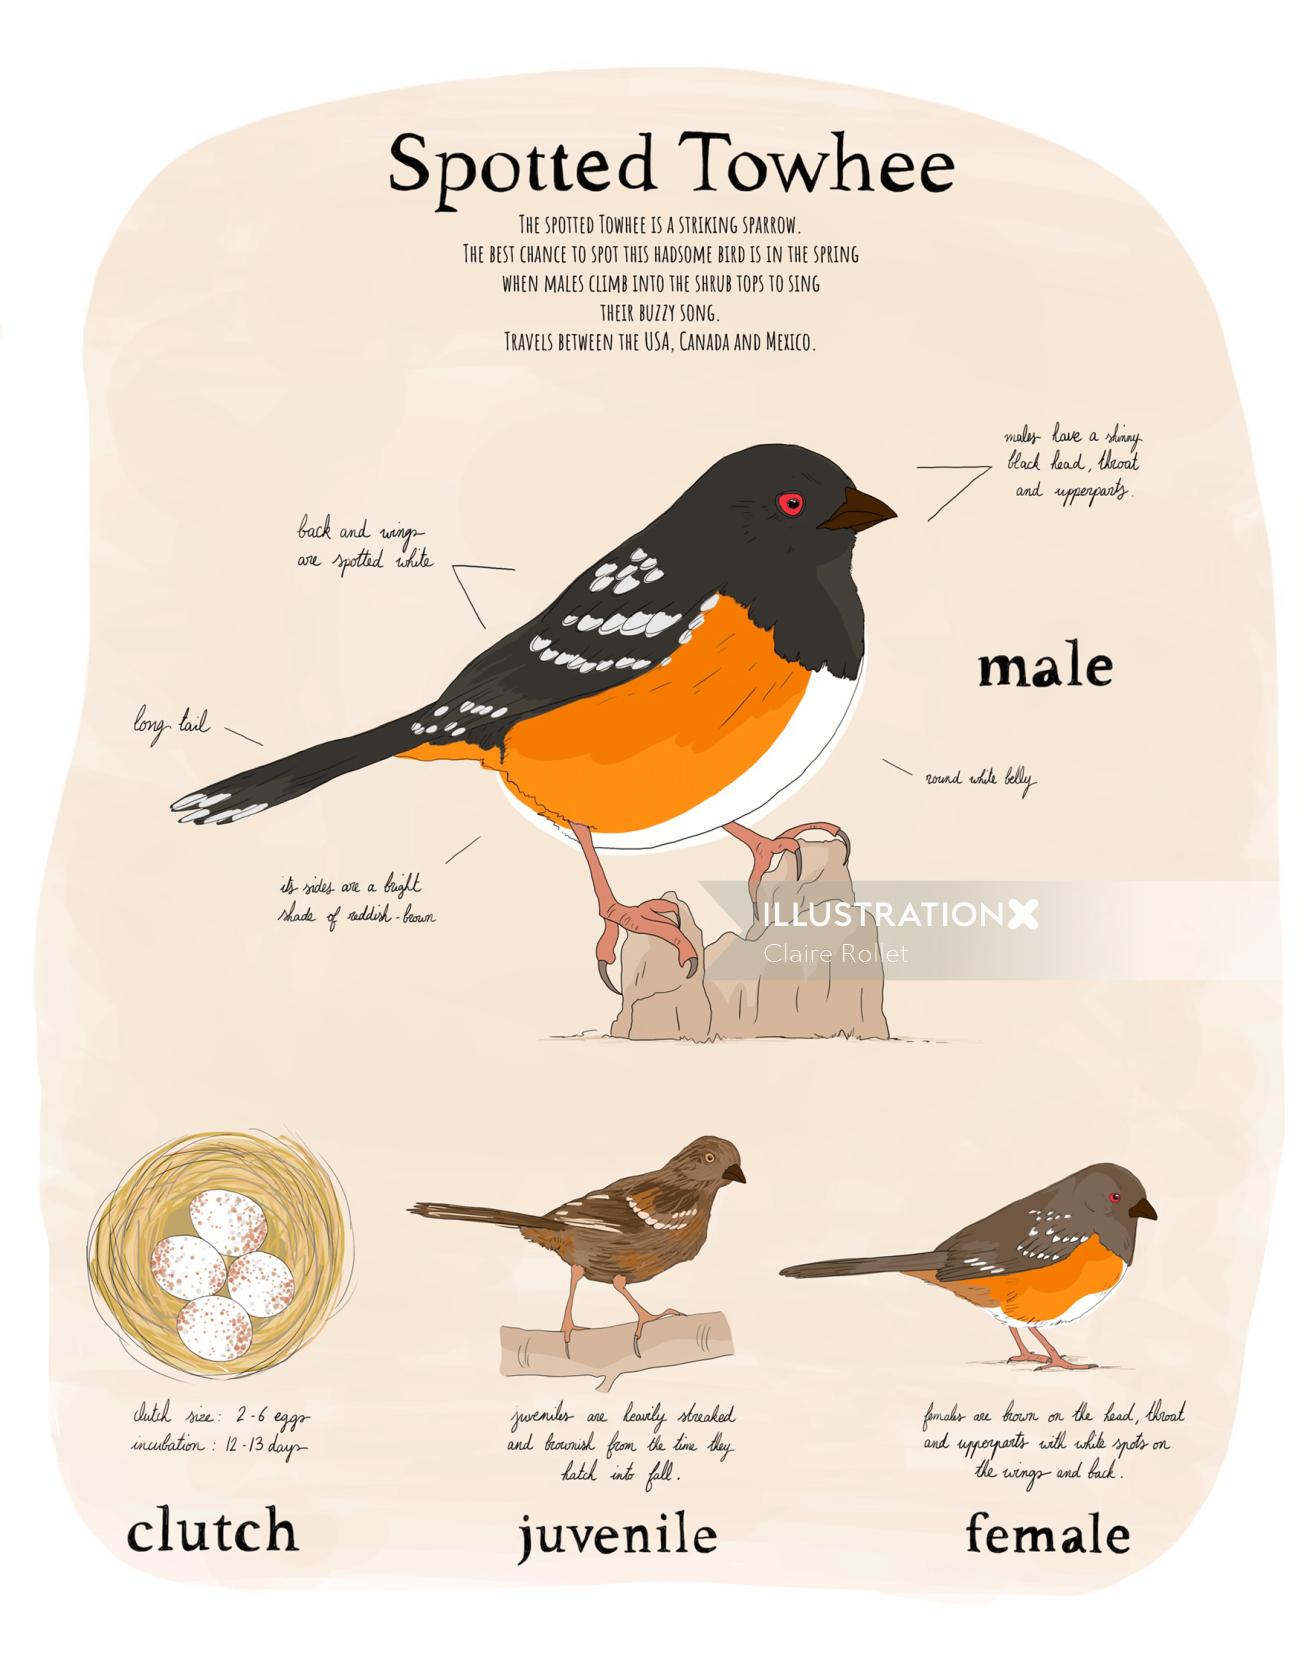 ornithology illustration of spotted towhee bird by Claire Rollet